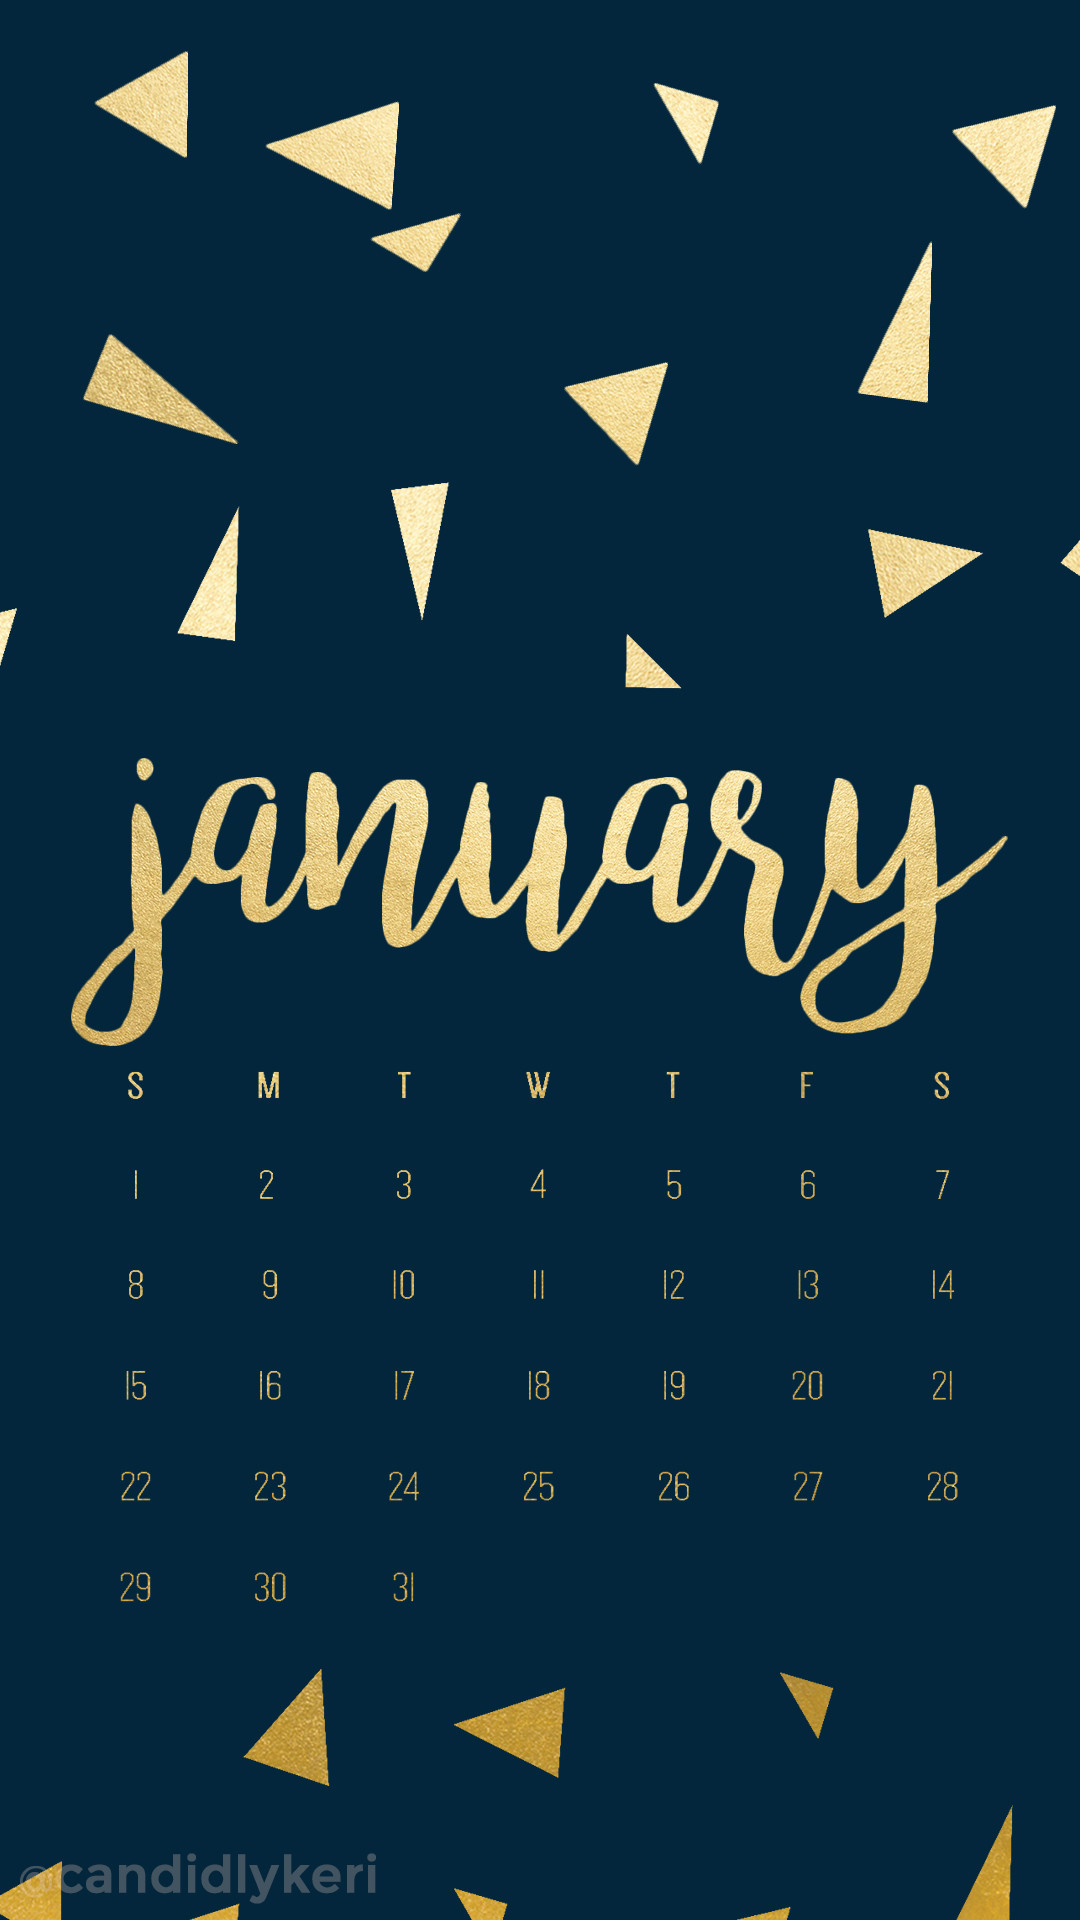 Wallpapers with Calendar 2018 57 images